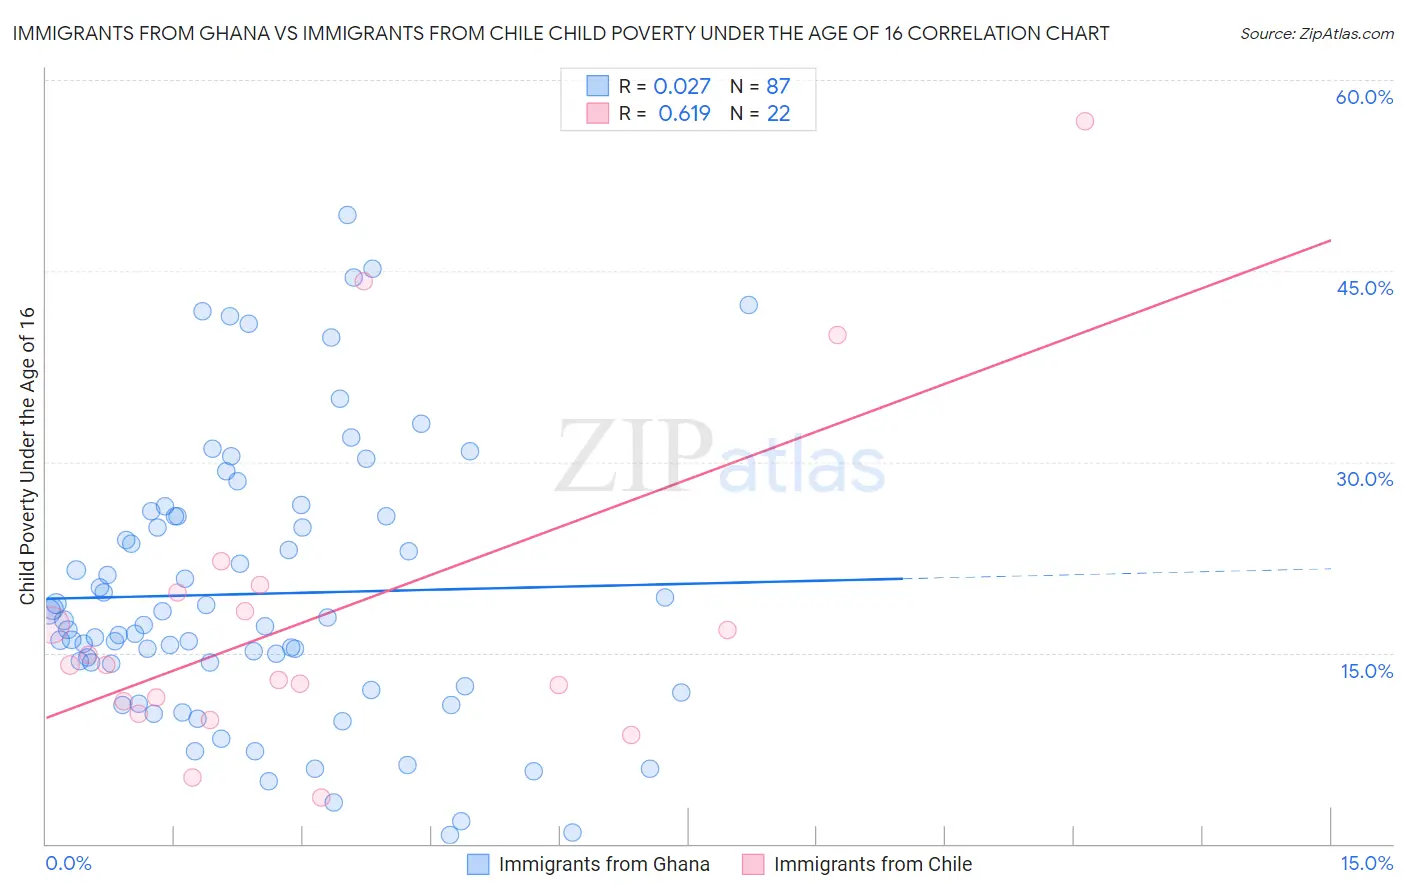 Immigrants from Ghana vs Immigrants from Chile Child Poverty Under the Age of 16